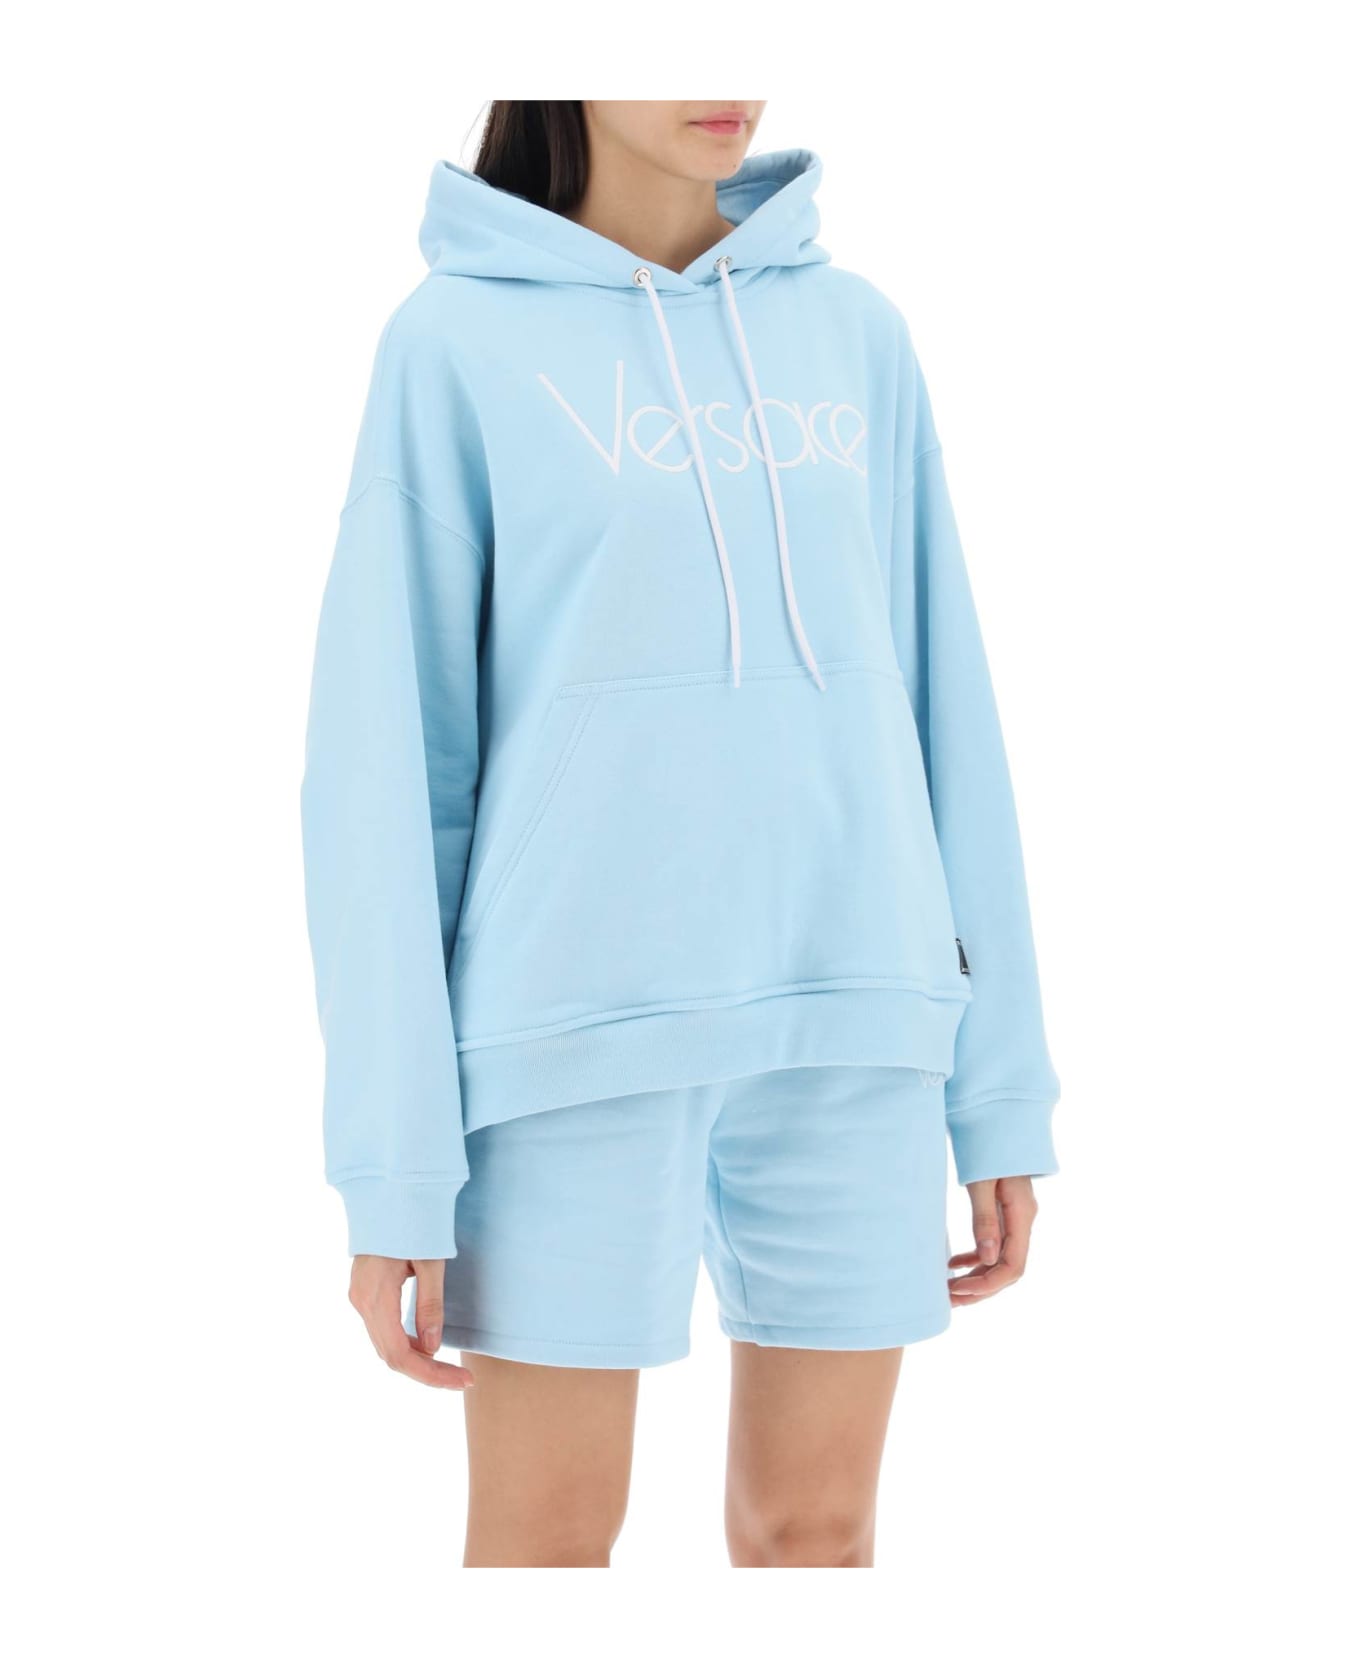 Versace Hoodie With 1978 Re-edition Logo - Pale Blue+bianco